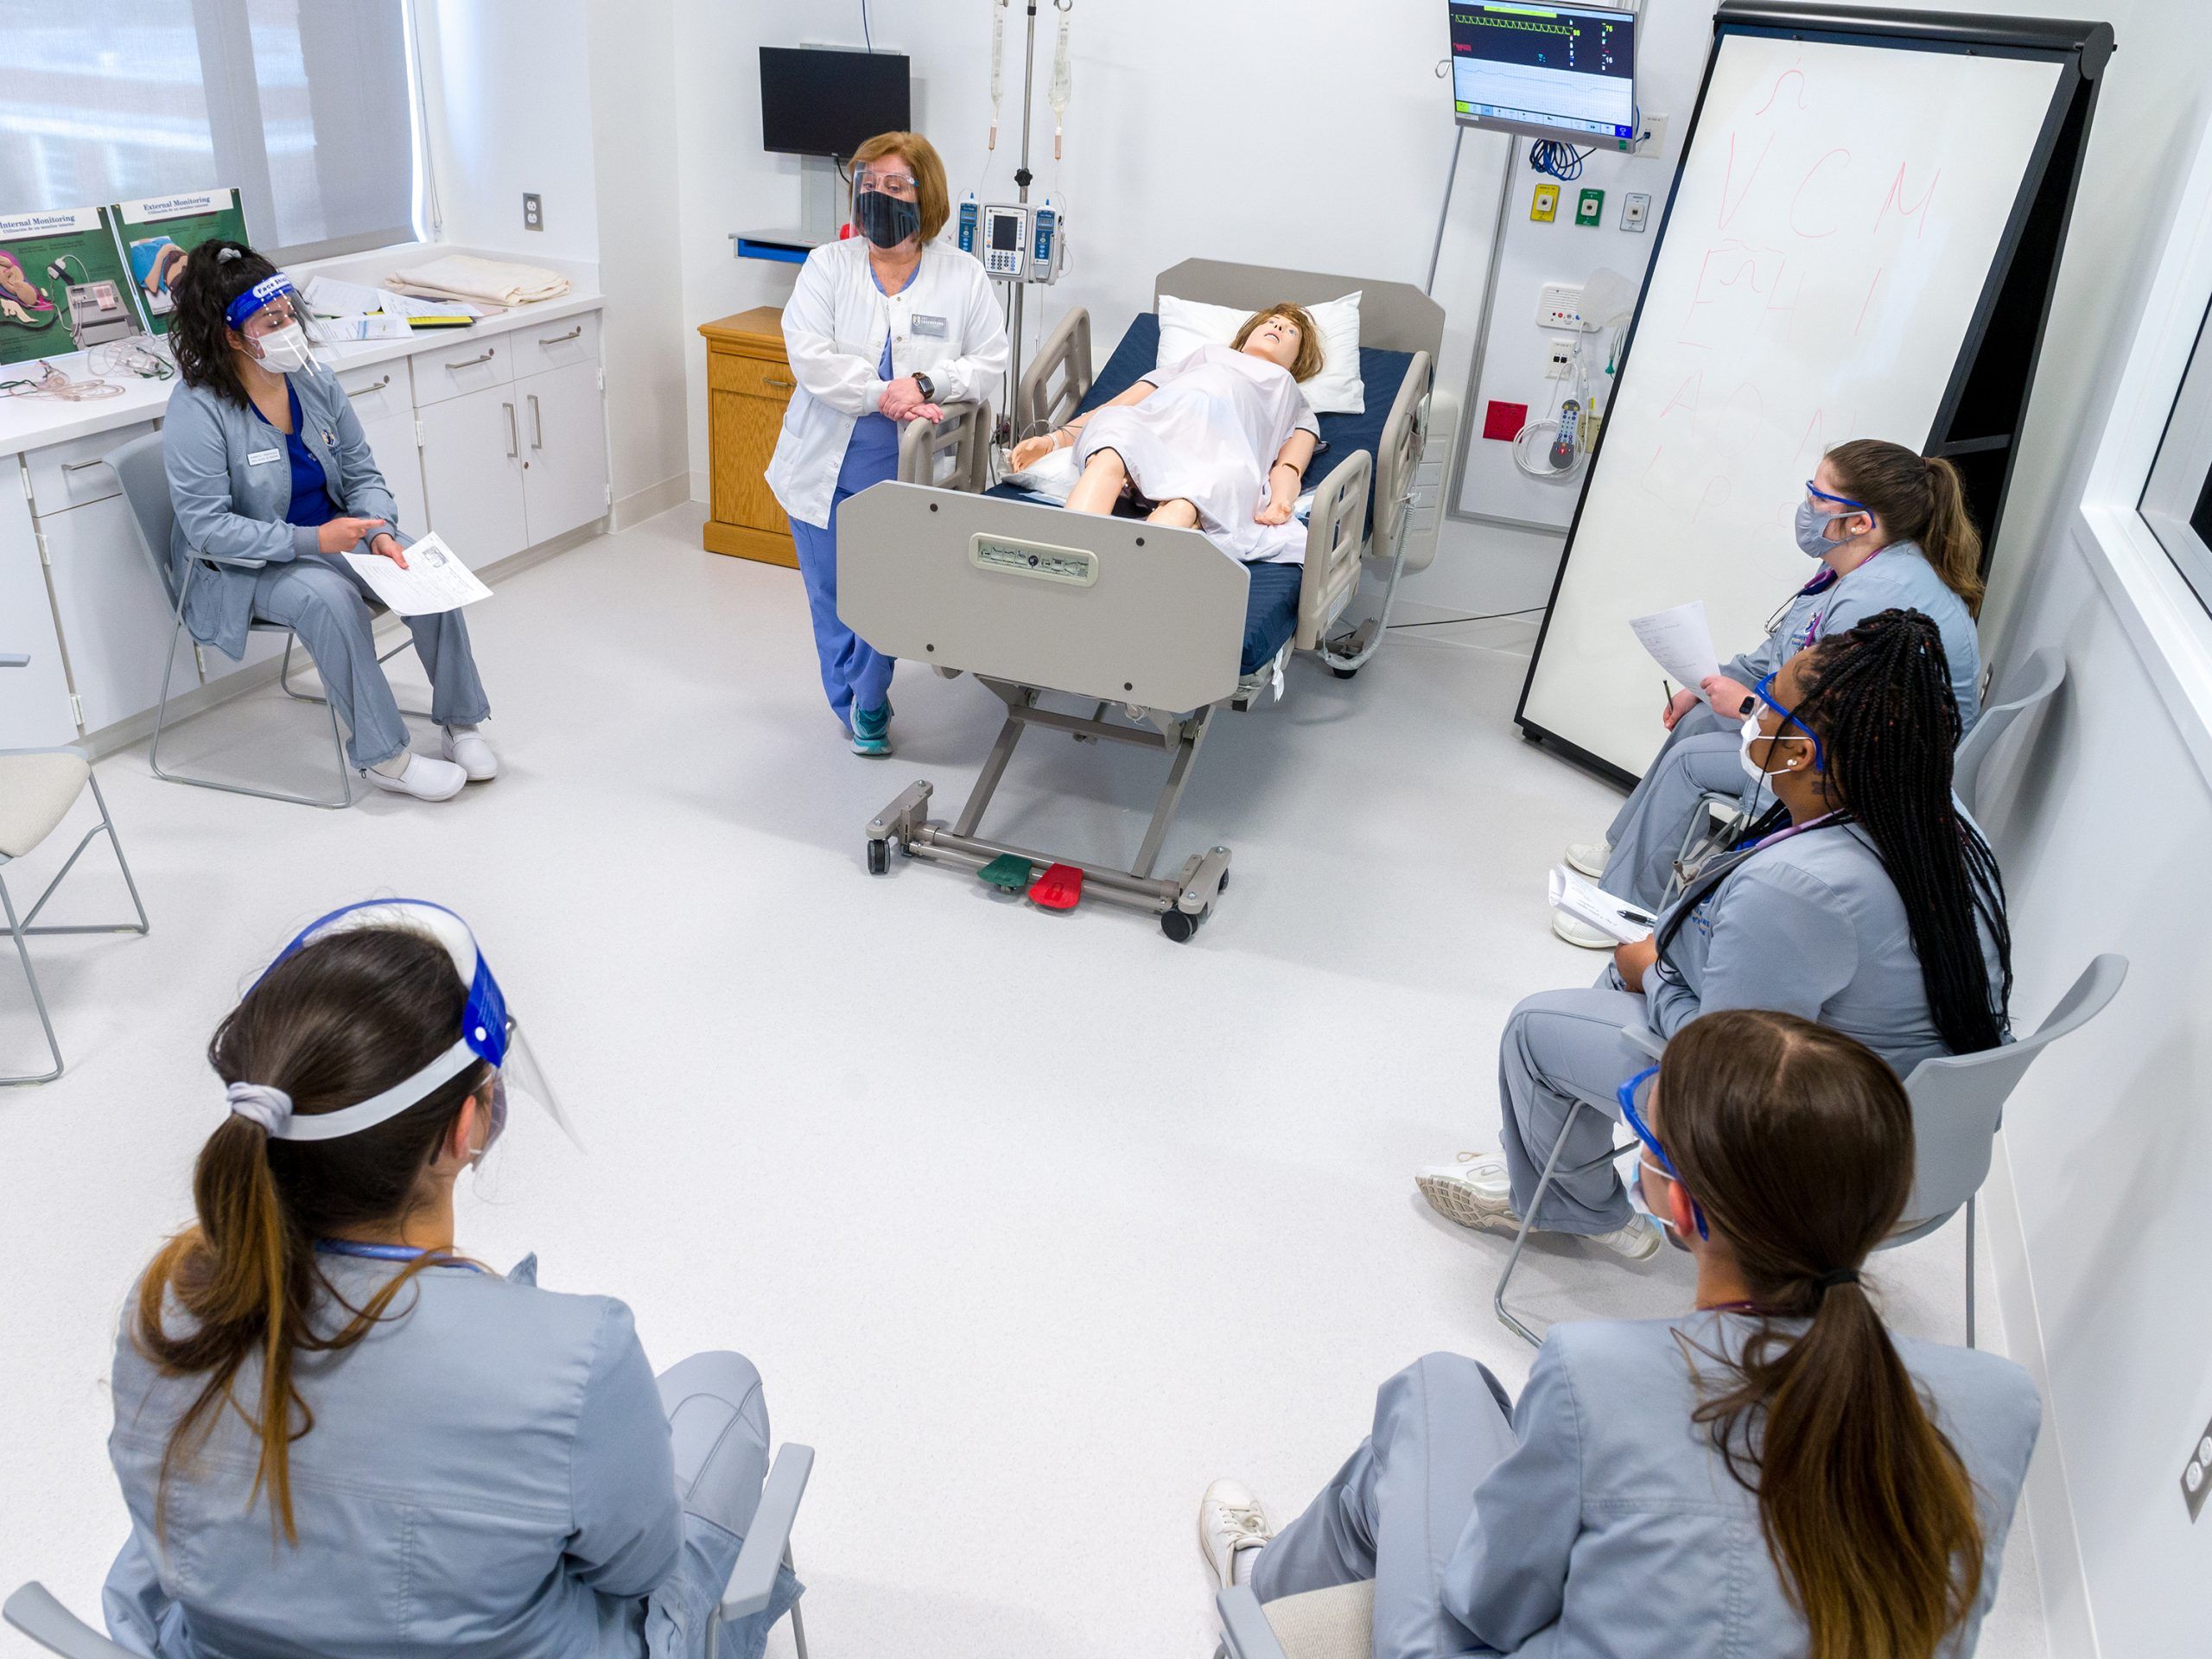 Nursing students watch an instructor demonstrate on a model